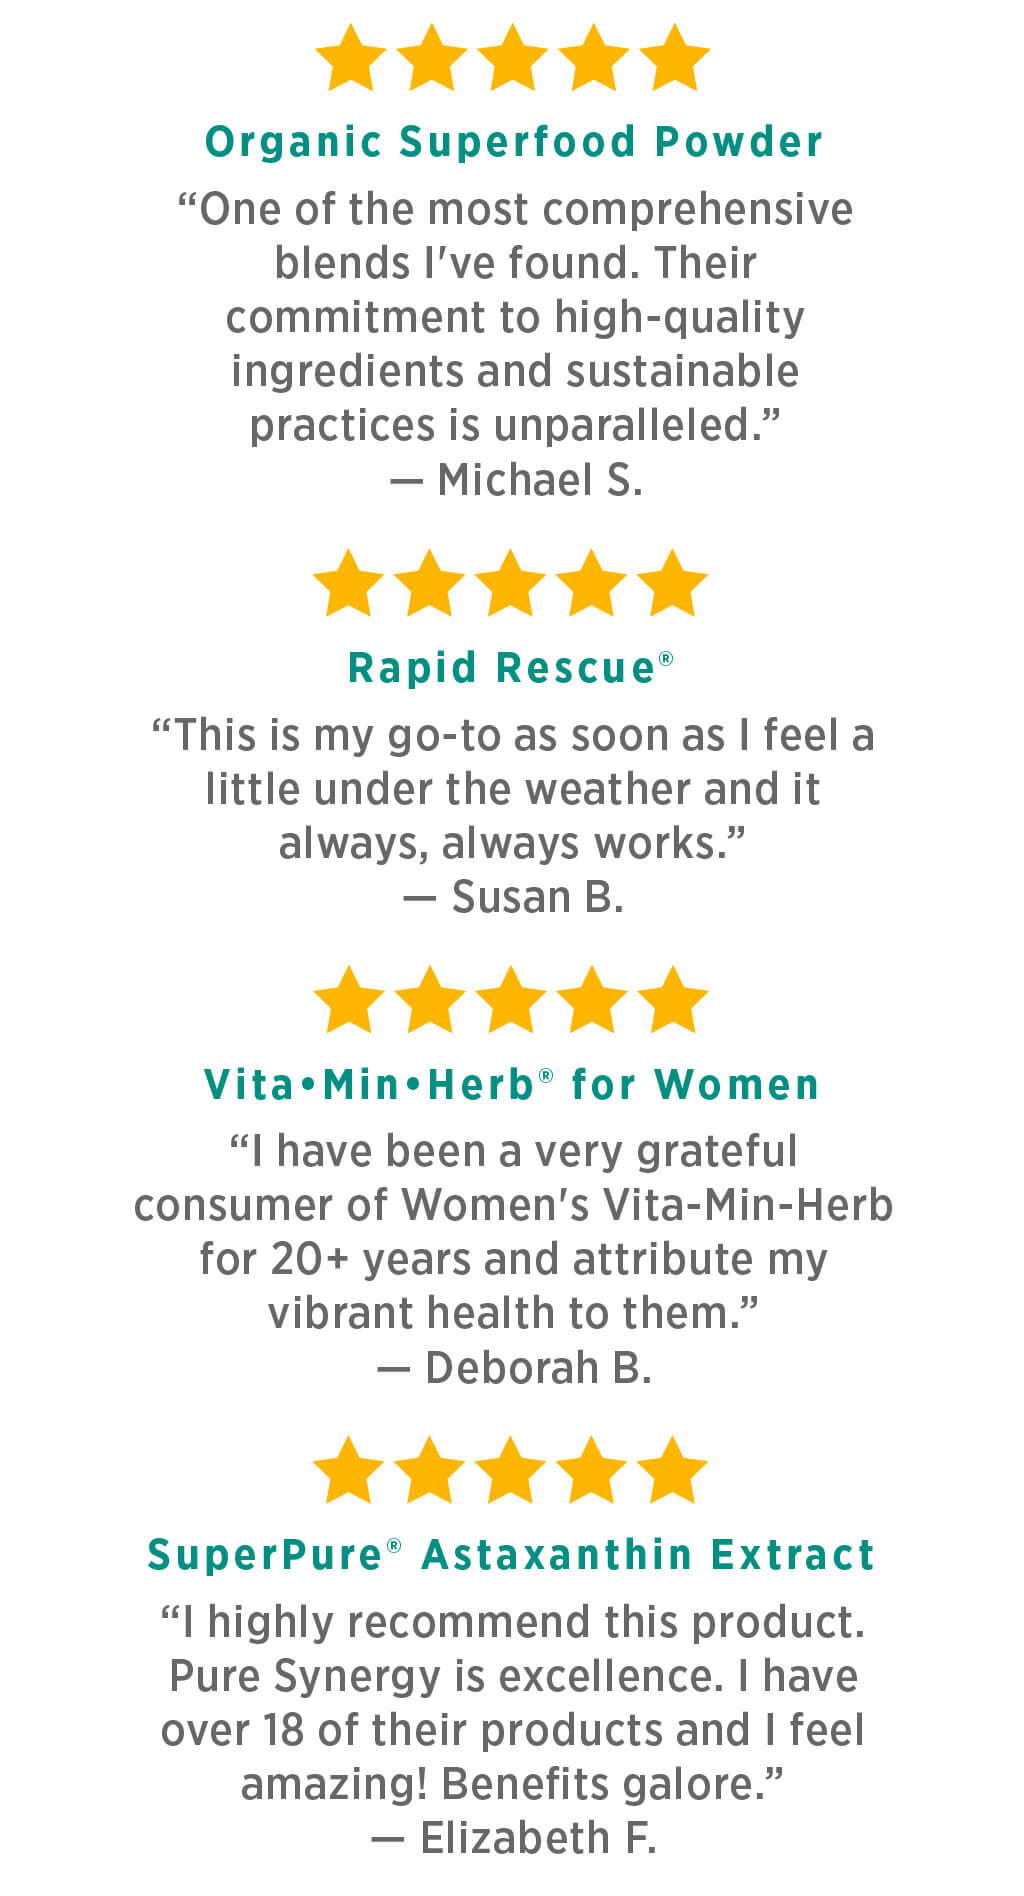 5-Star Reviews: “This is my go-to as soon as I feel a little under the weather and it always, always works.” – Susan B. | Rapid Rescue®. “One of the most comprehensive blends I've found. Their commitment to high-quality ingredients and sustainable practices is unparalleled.” – Micheal S. | Organic Superfood Powder. I have been a very grateful consumer of Women's Vita-Min-Herb for 20+ years and attribute my vibrant health to them. – Deborah B. | Vita•Min•Herb® for Women. I highly recommend this product. Pure Synergy is excellence. I have over 18 of their products and I feel amazing! Benefits galore. – Elizabeth F. | SuperPure® Astaxanthin Extract